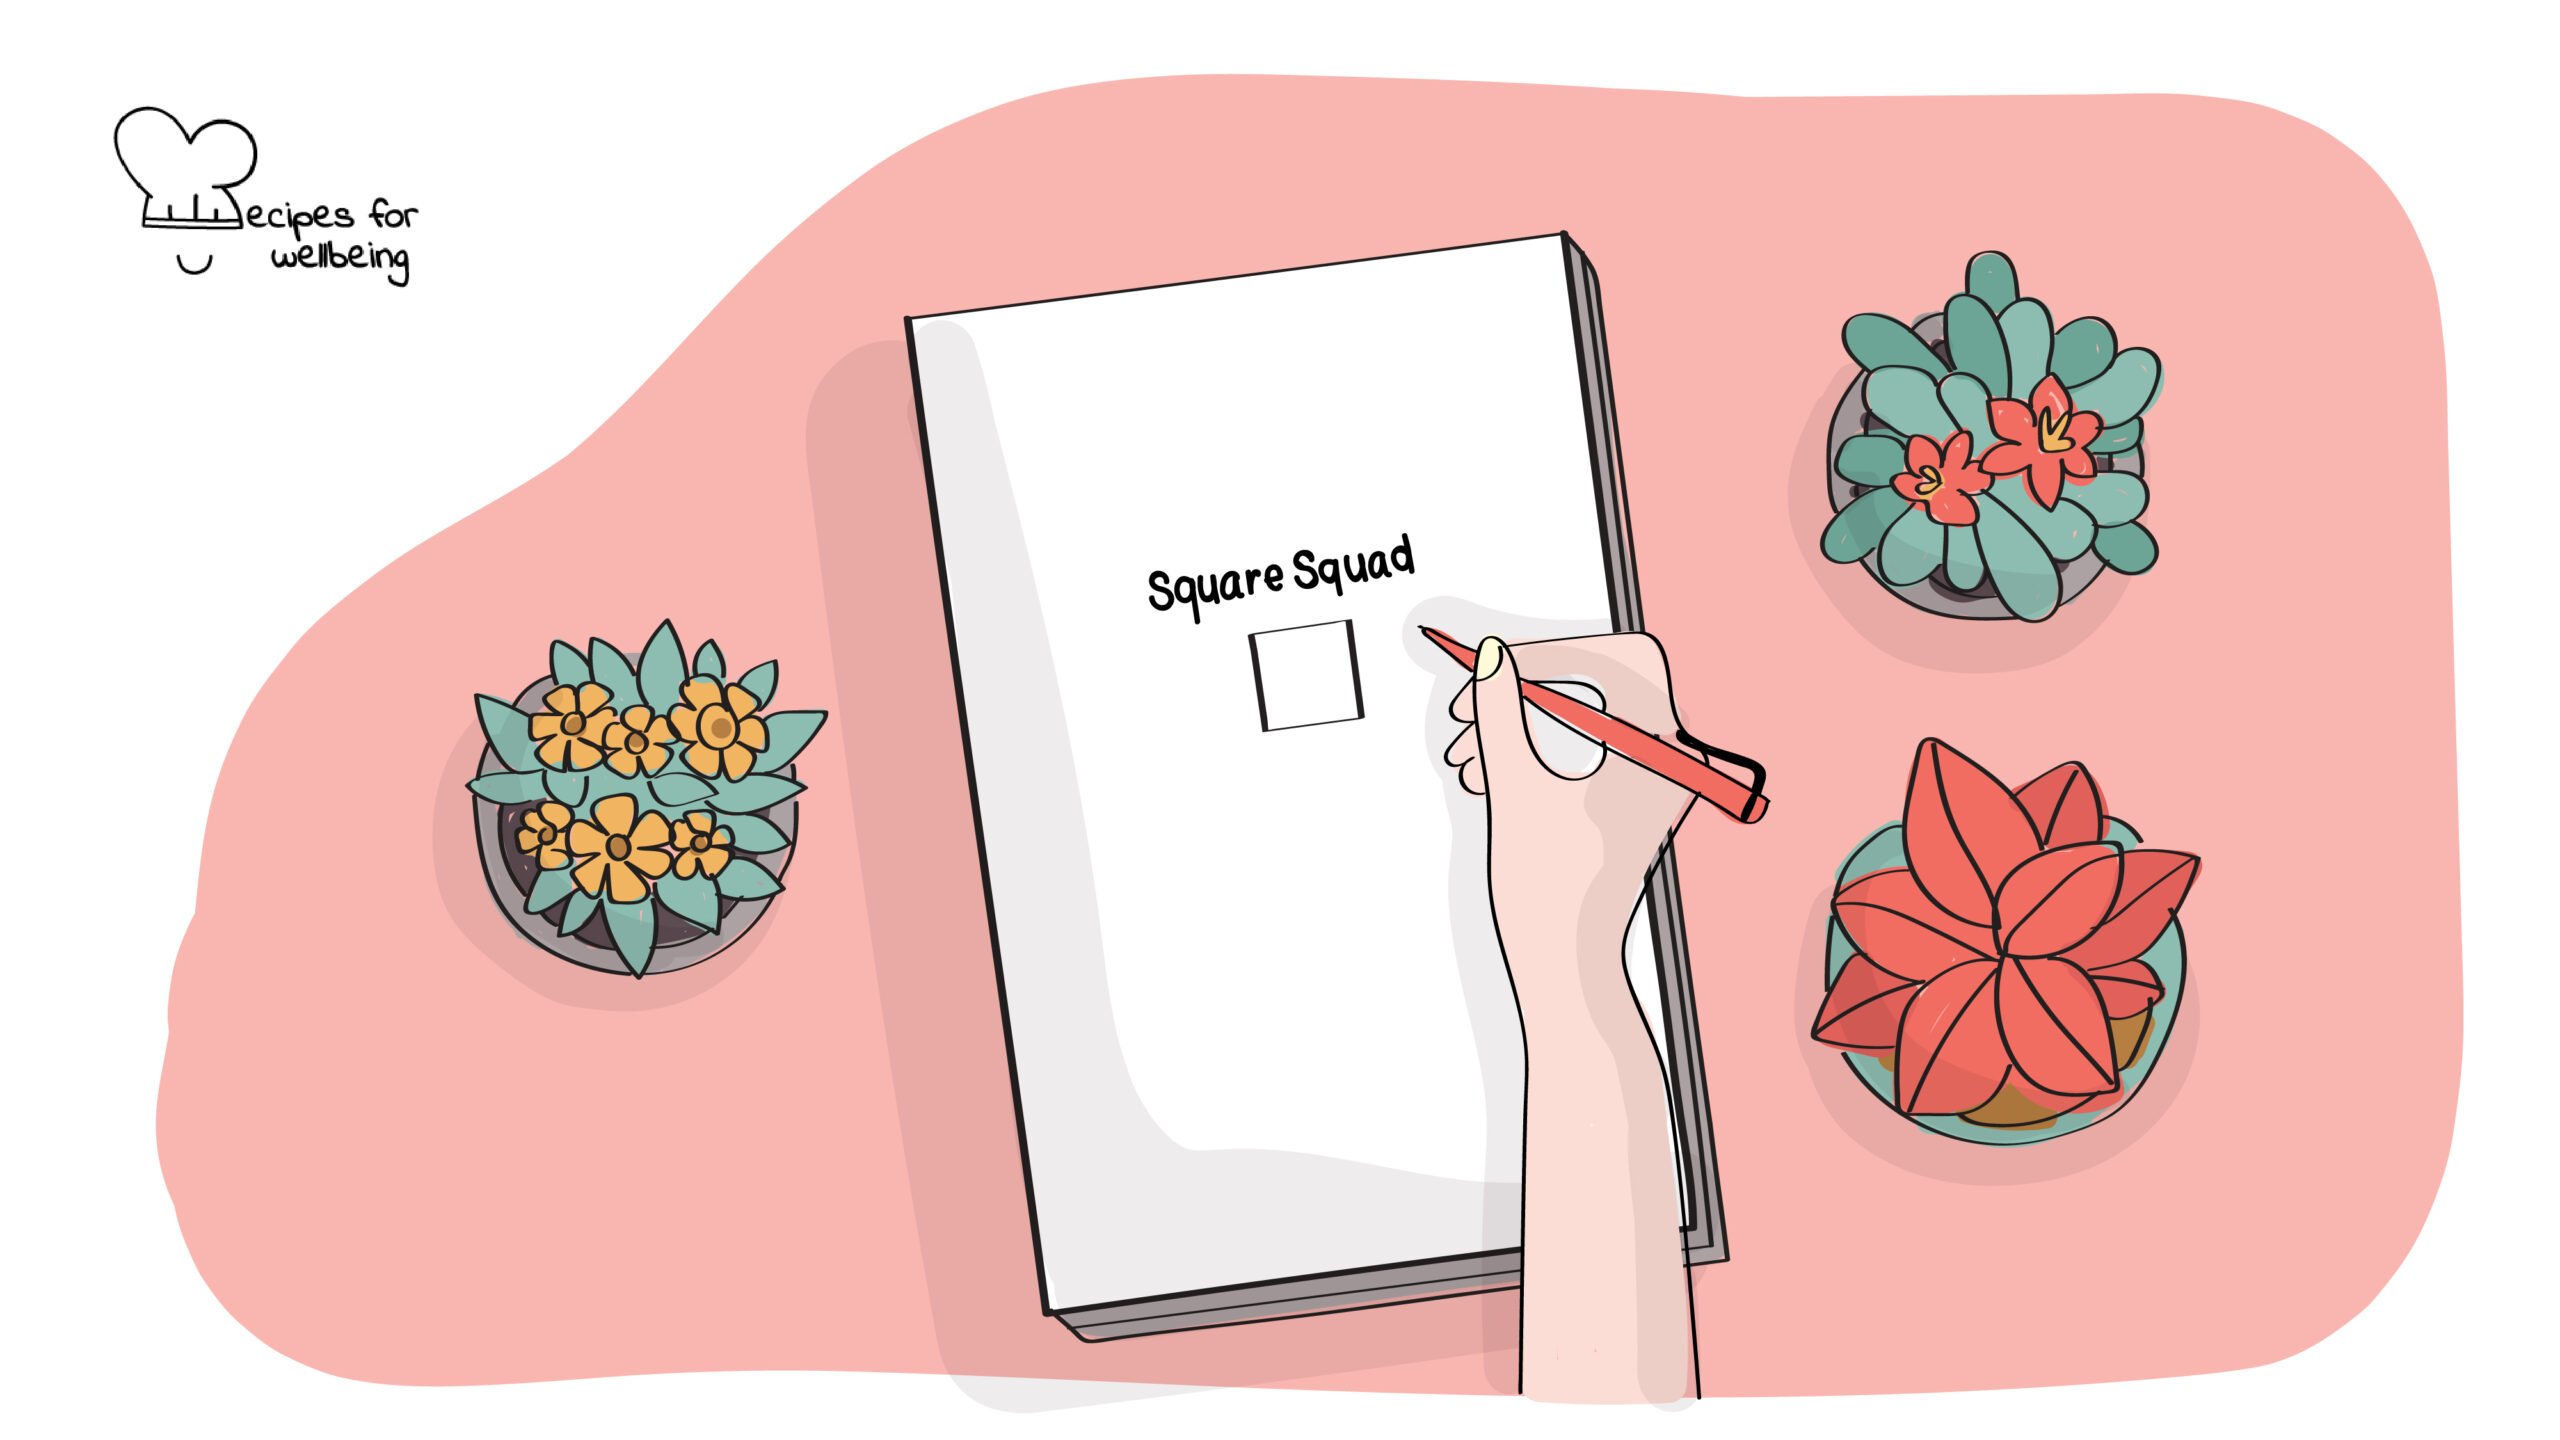 Illustration of a person's hand writing the words "square squad" and drawing a square on a notebook. © Recipes for Wellbeing